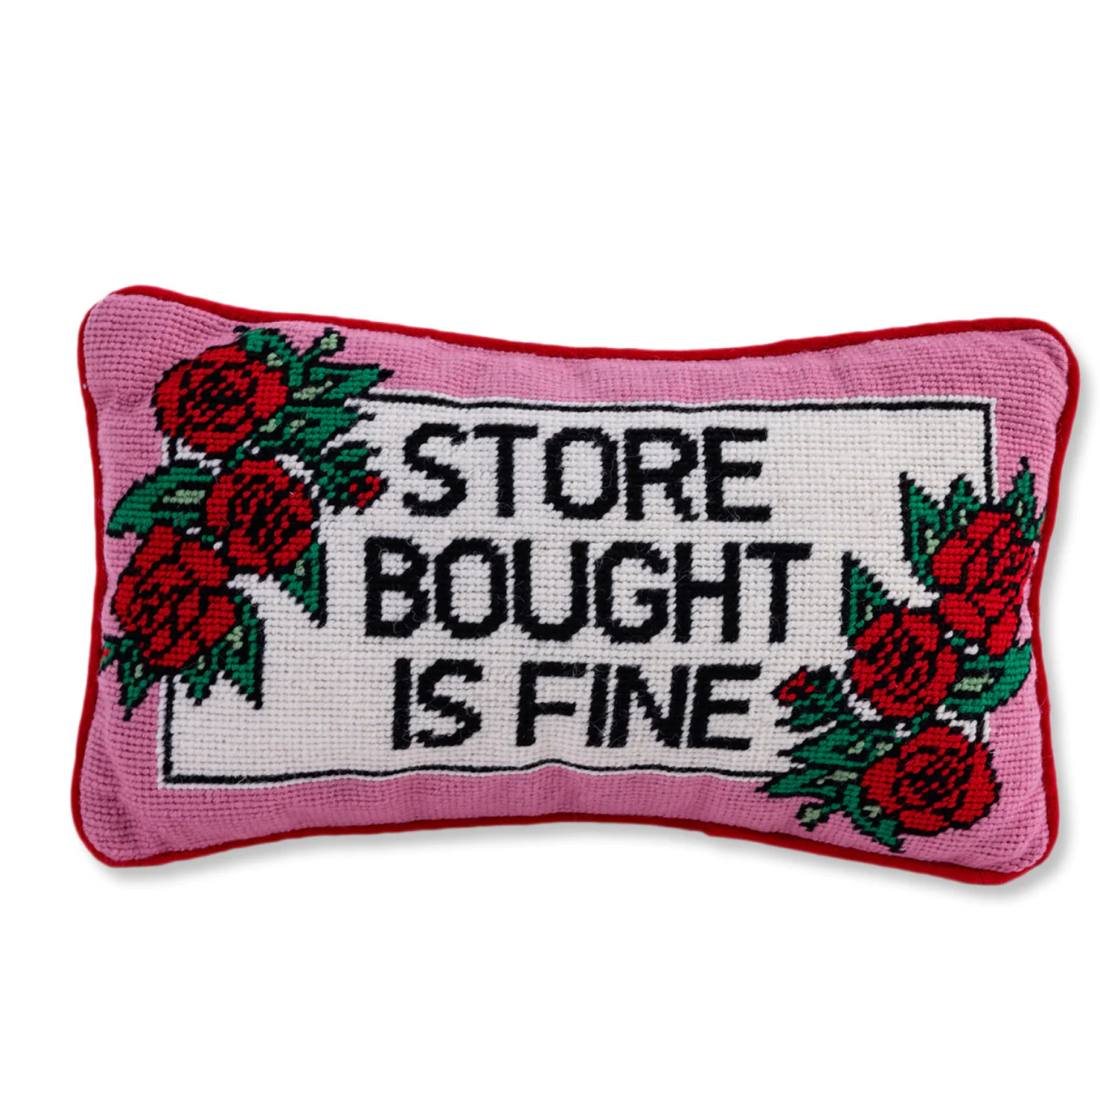 Store Bought Is Fine Needlepoint Pillow